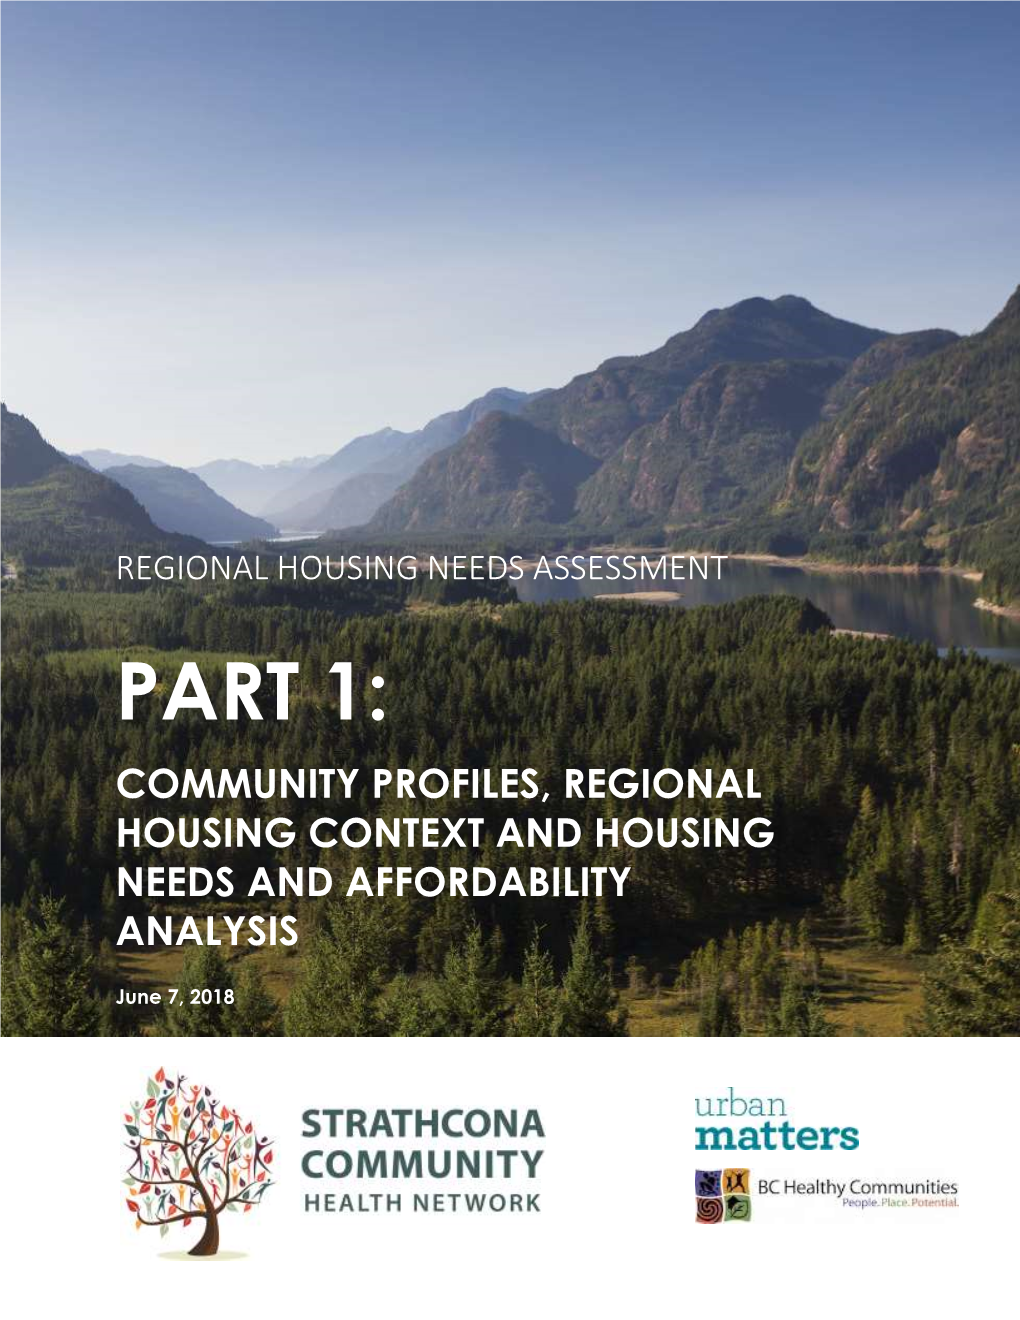 Part 1: Community Profiles, Regional Housing Context and Housing Needs and Affordability Analysis